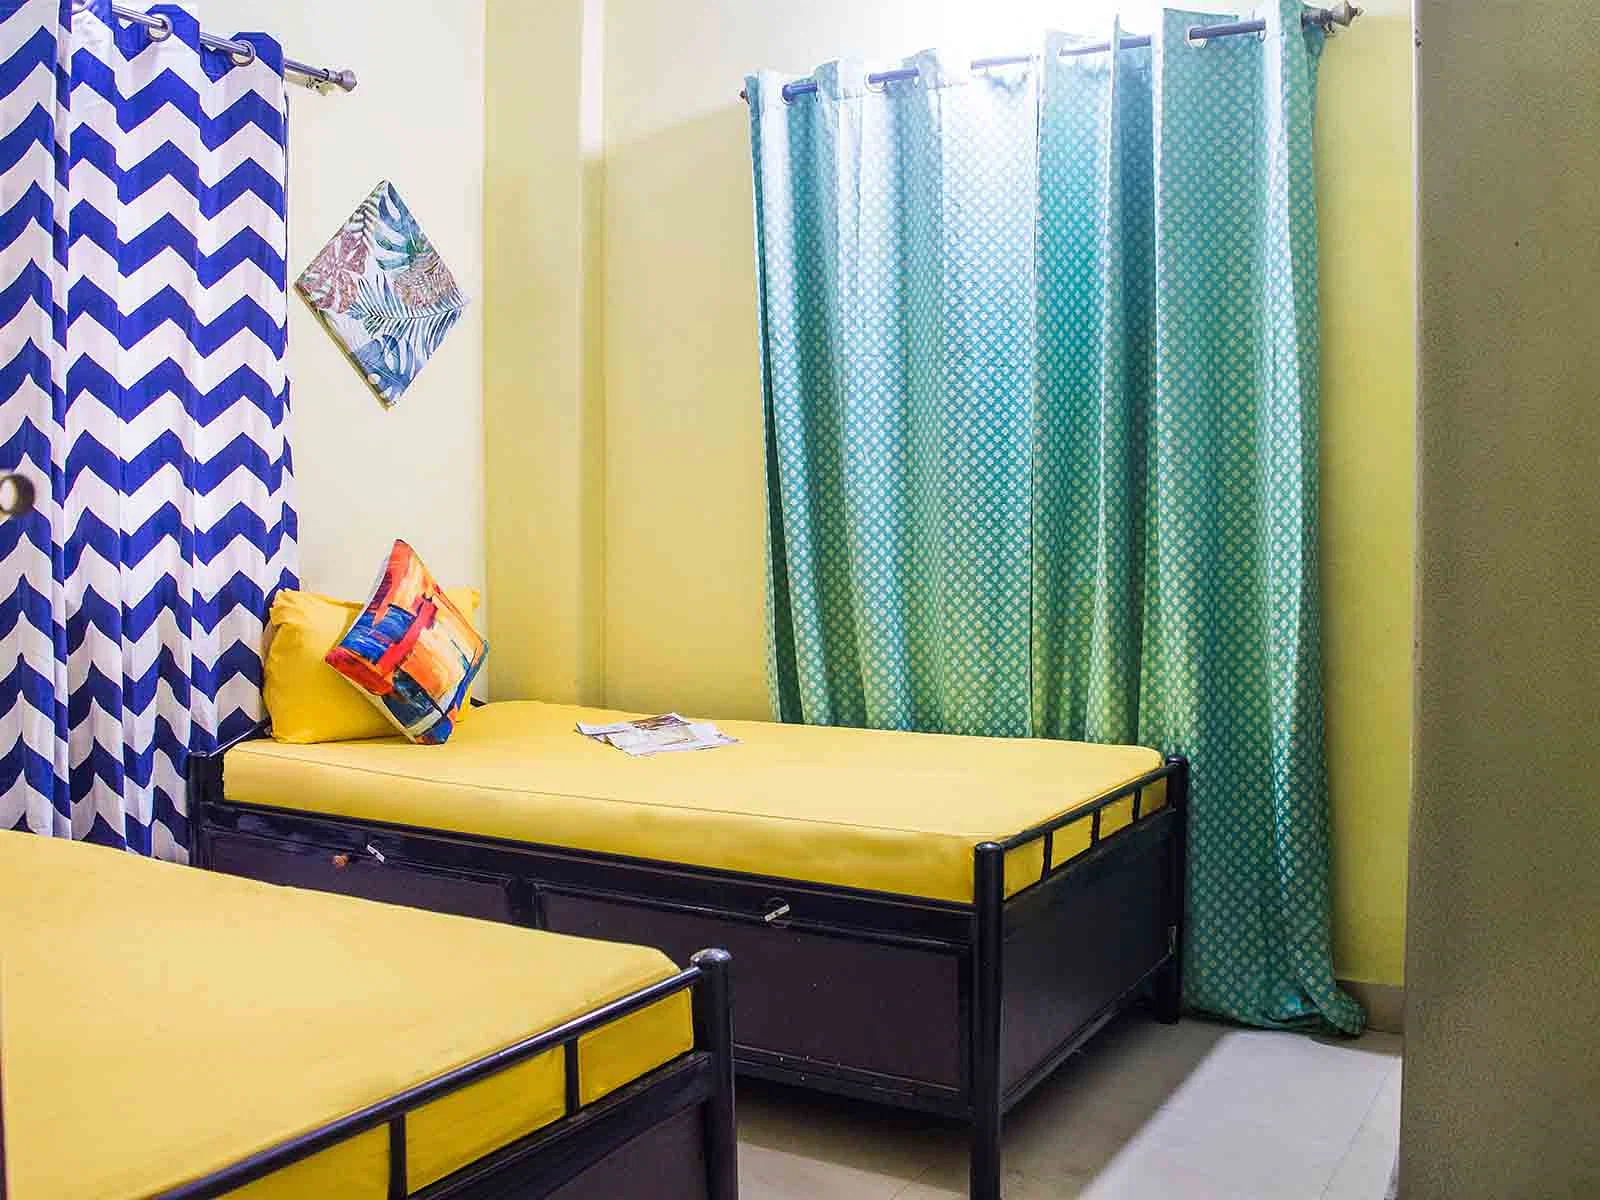 luxury PG accommodations with modern Wi-Fi, AC, and TV in Hadapsar-Pune-Zolo Avalon